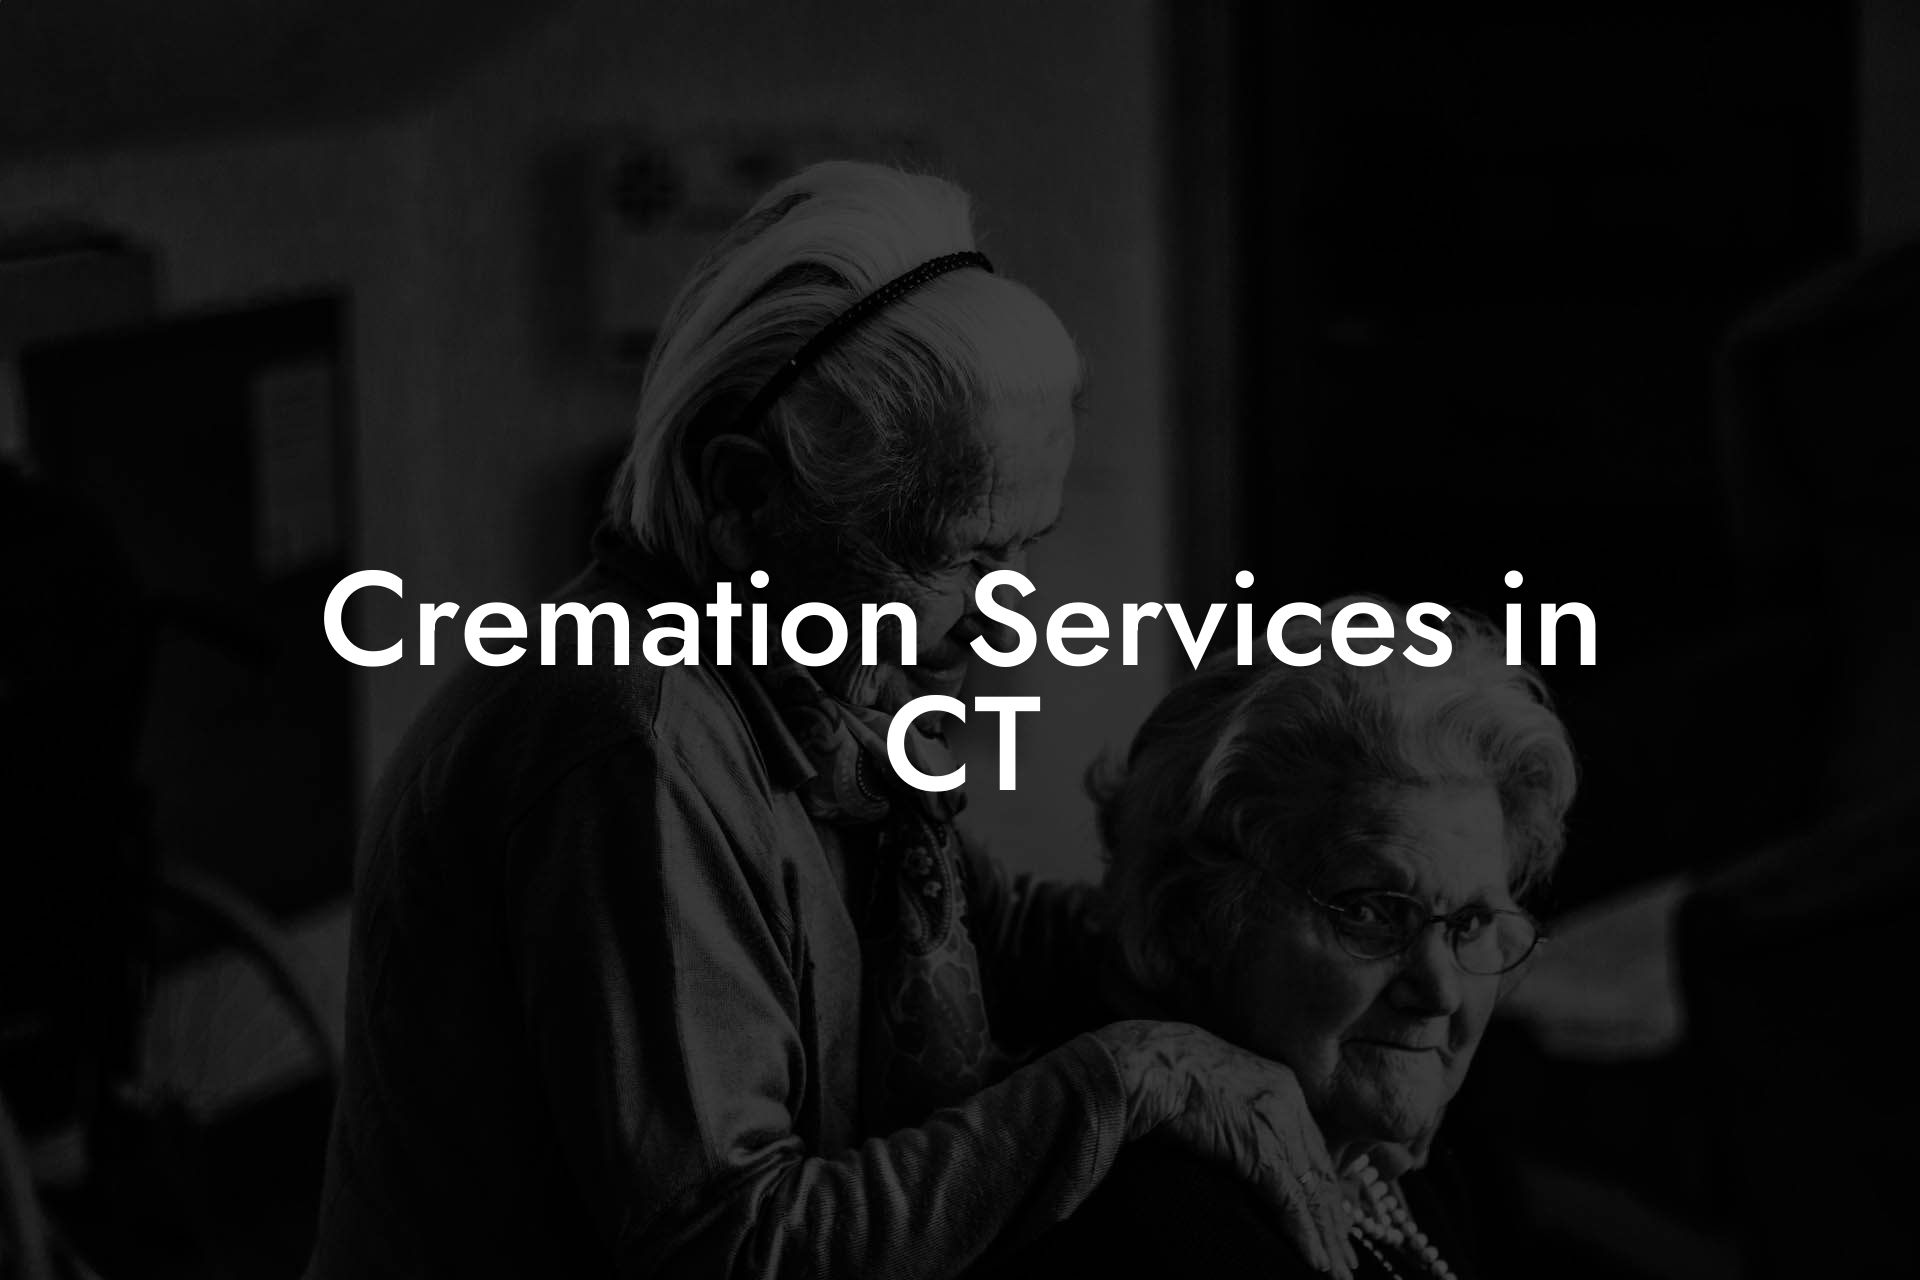 Cremation Services in CT